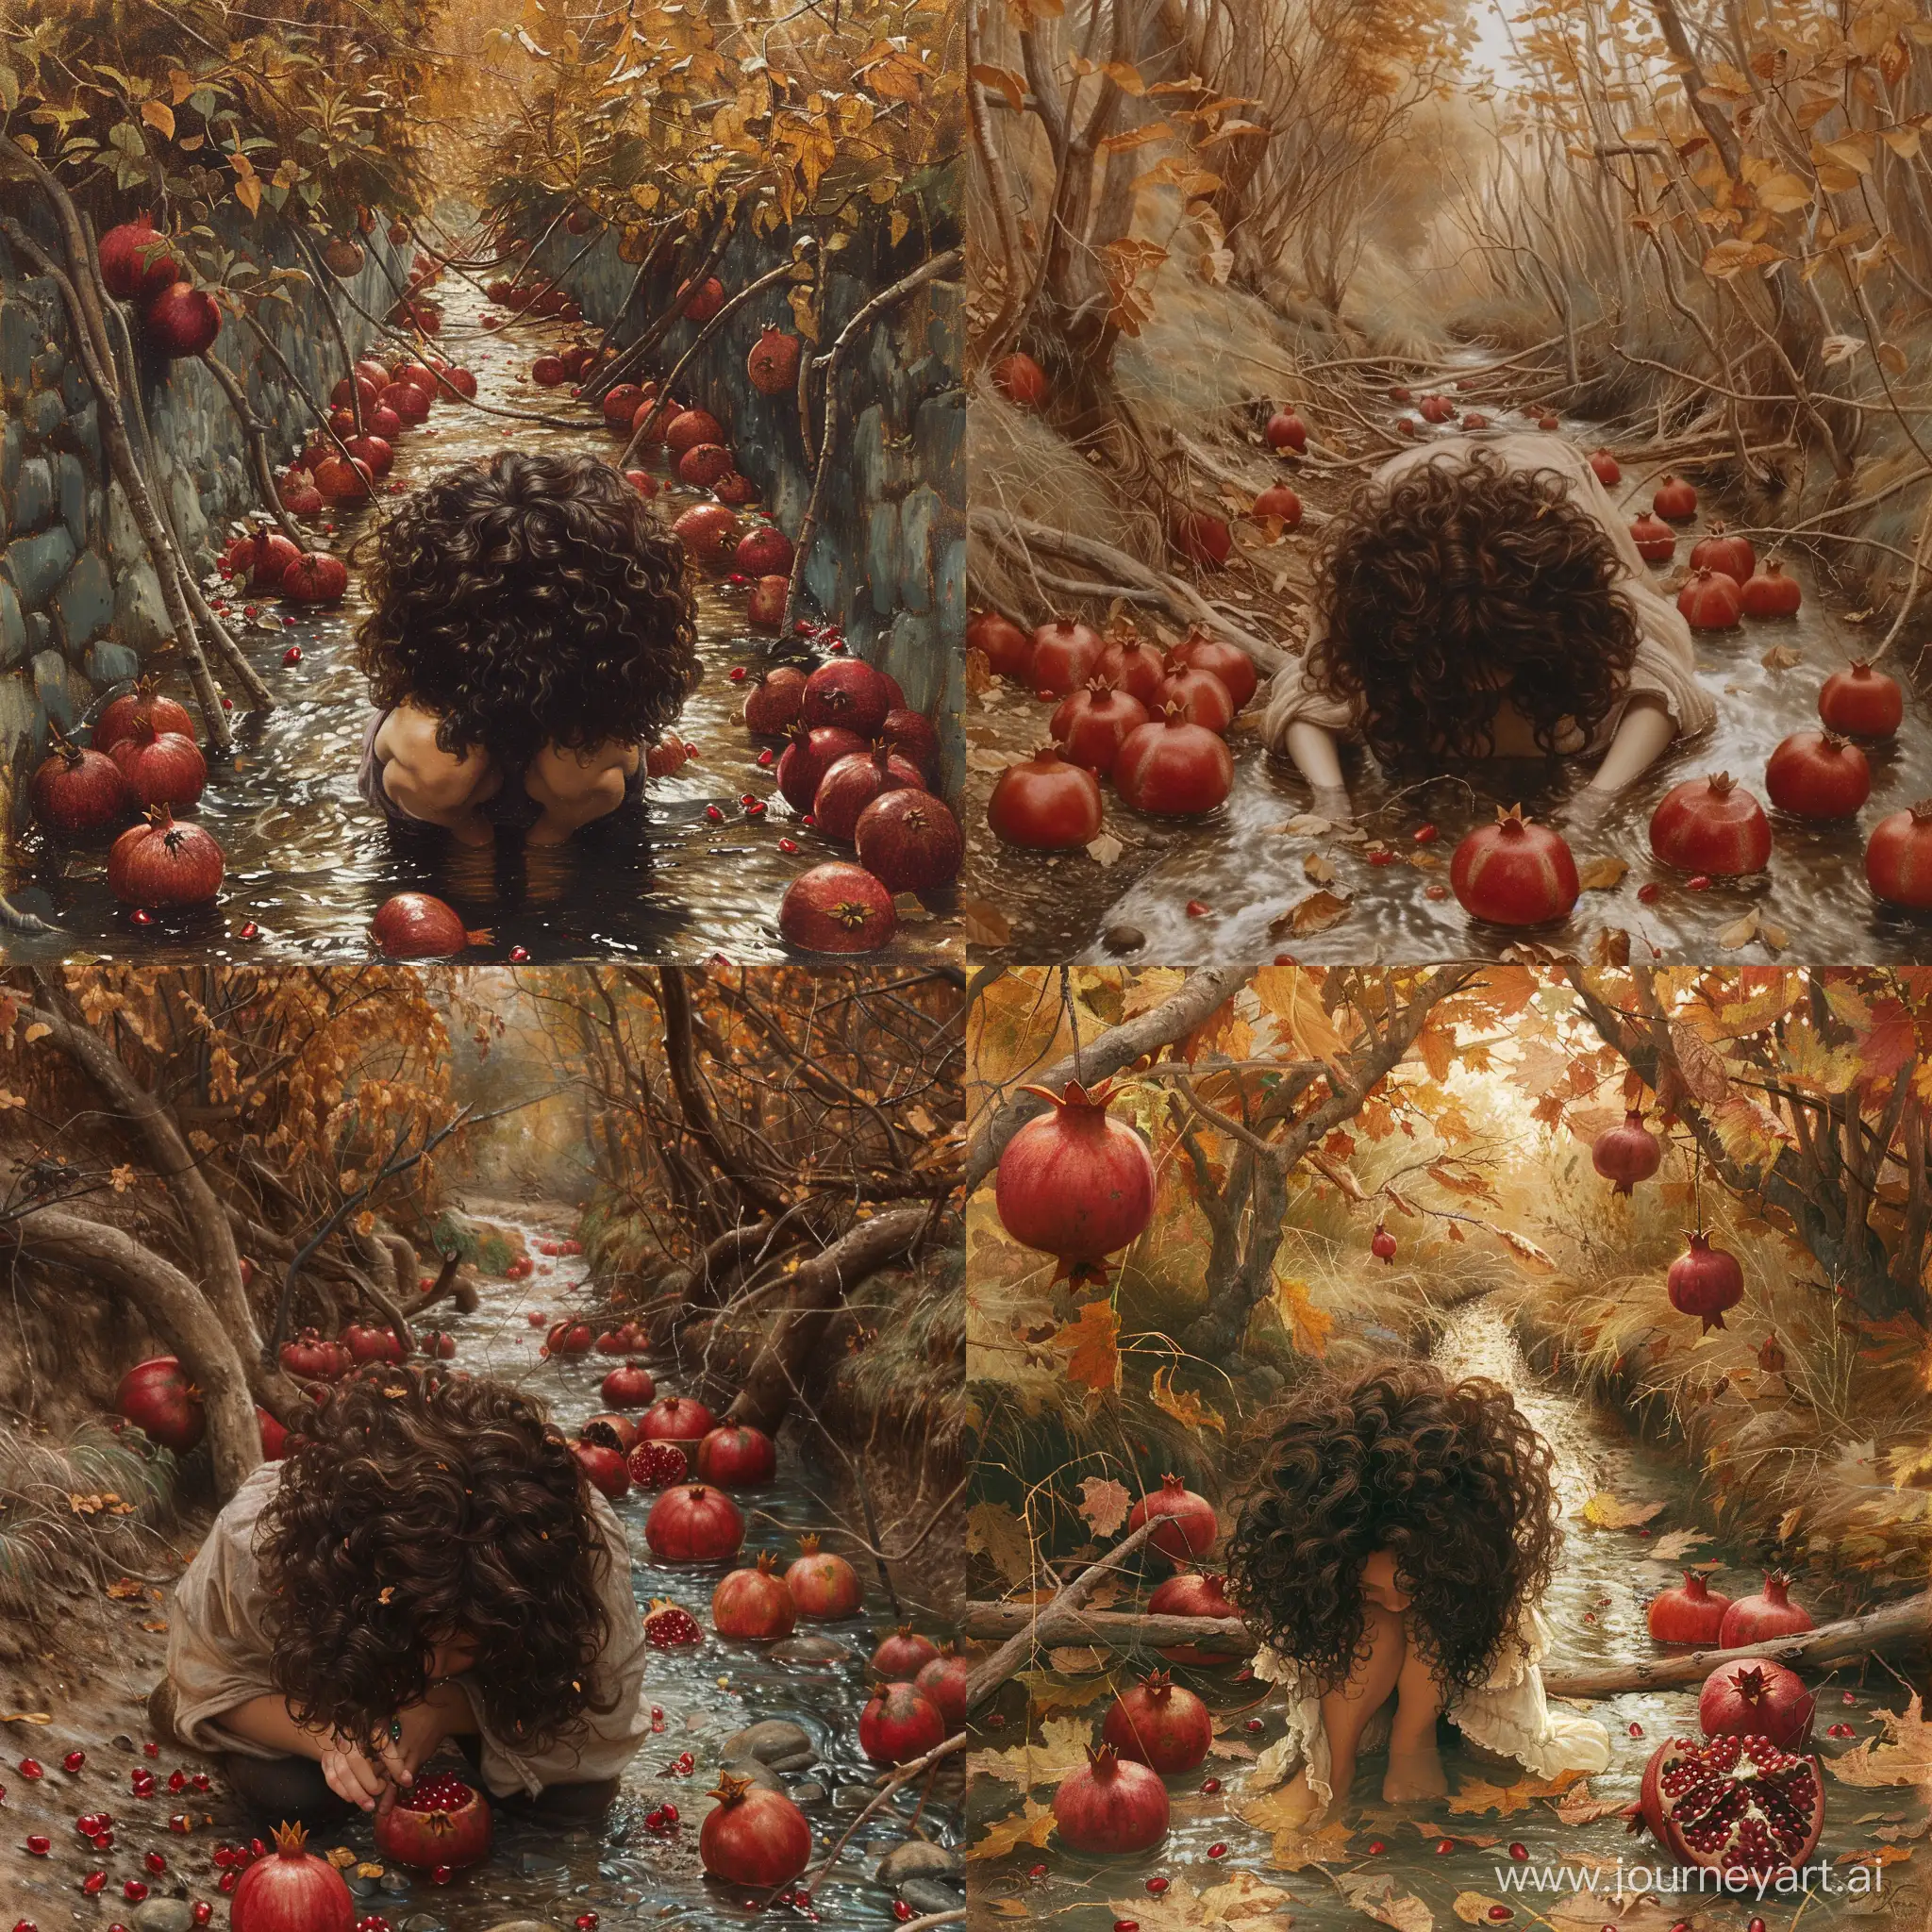 Solitude-by-the-Stream-Autumn-Reflection-with-a-CurlyHaired-Girl-and-Fallen-Pomegranate-Trees